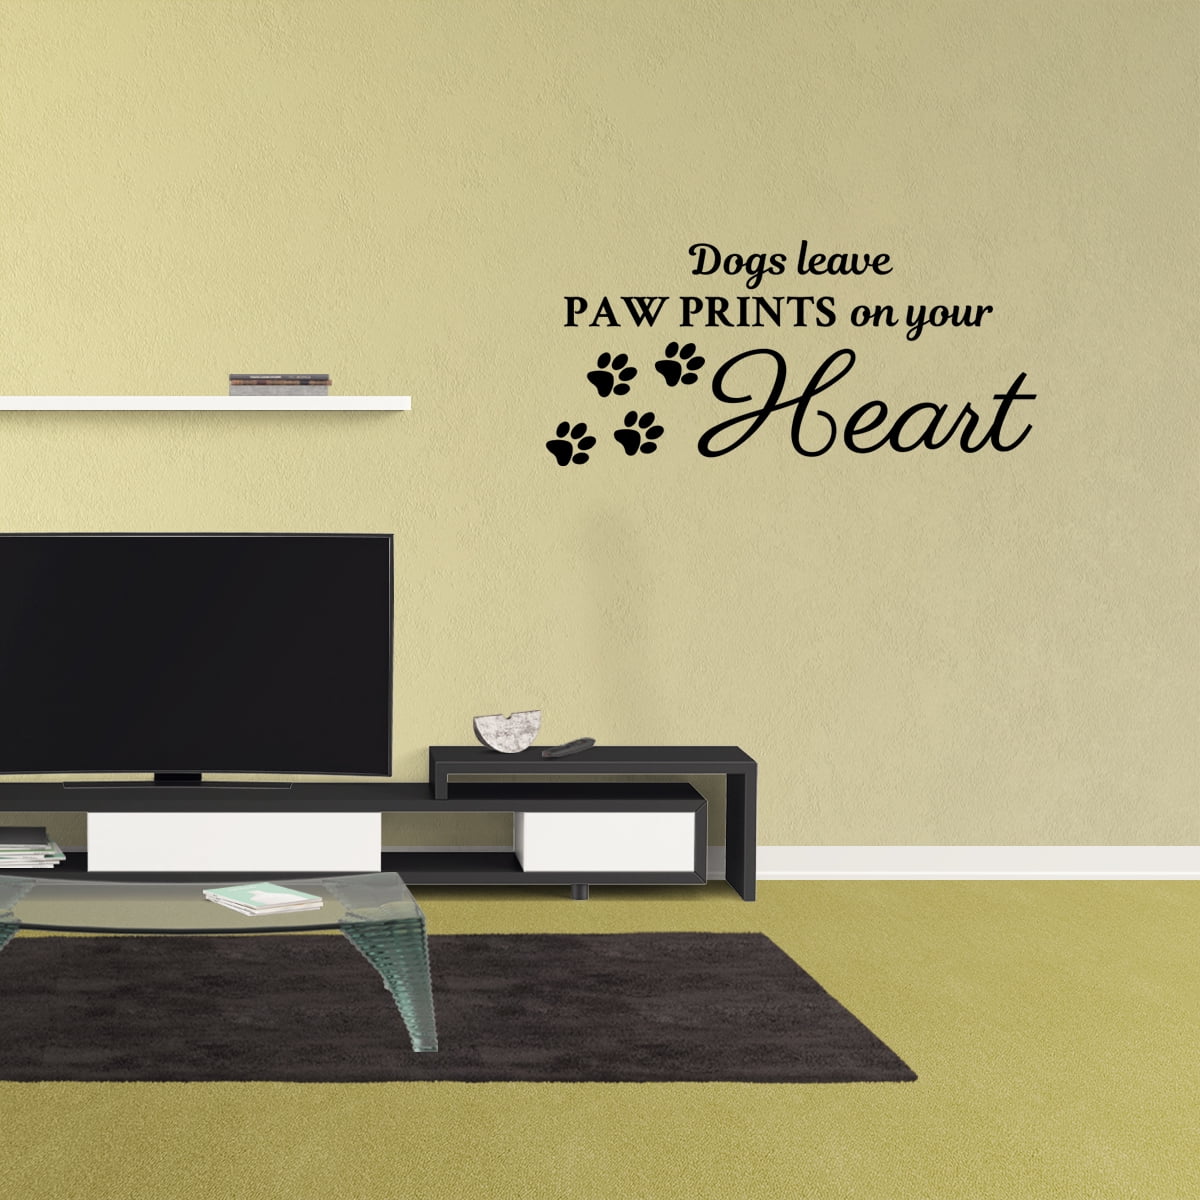 Dogs Leave Paw Prints On Your Heart Vinyl Wall Art Decals Sticker J177